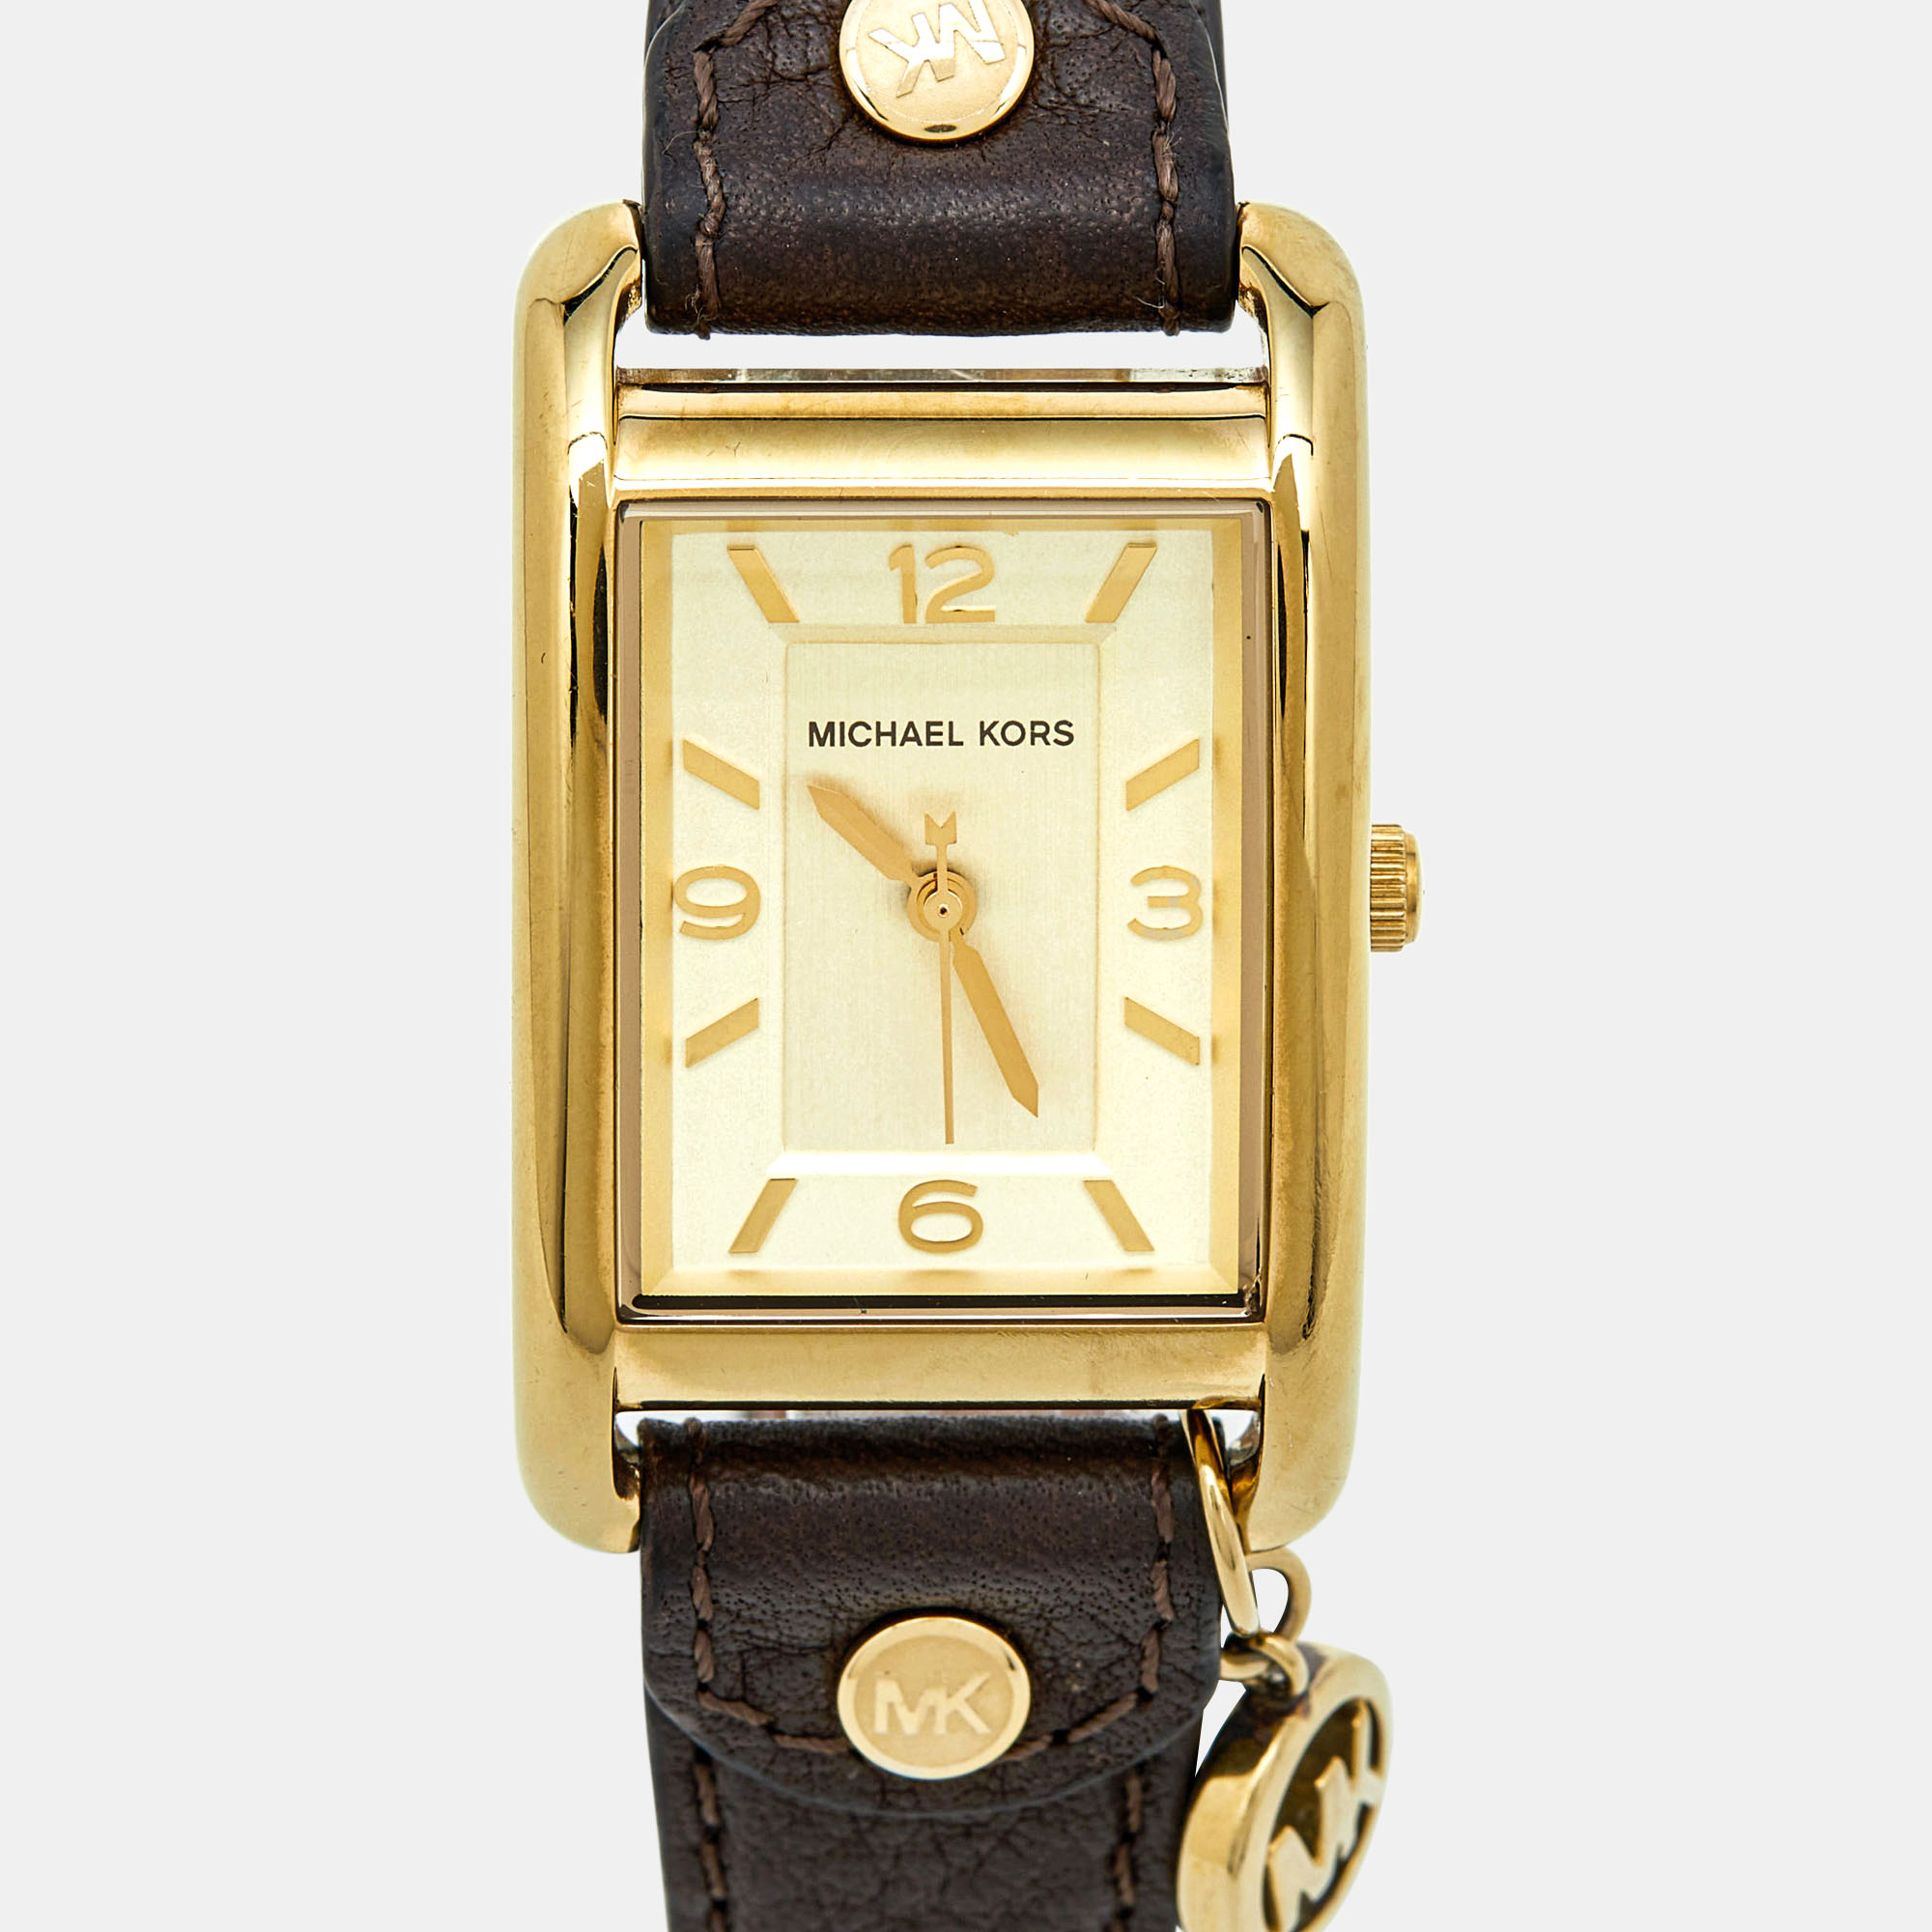 

Michael Kors Yellow Gold Plated Stainless Steel Leather Jet Set MK2166 Women's Wristwatch, Brown